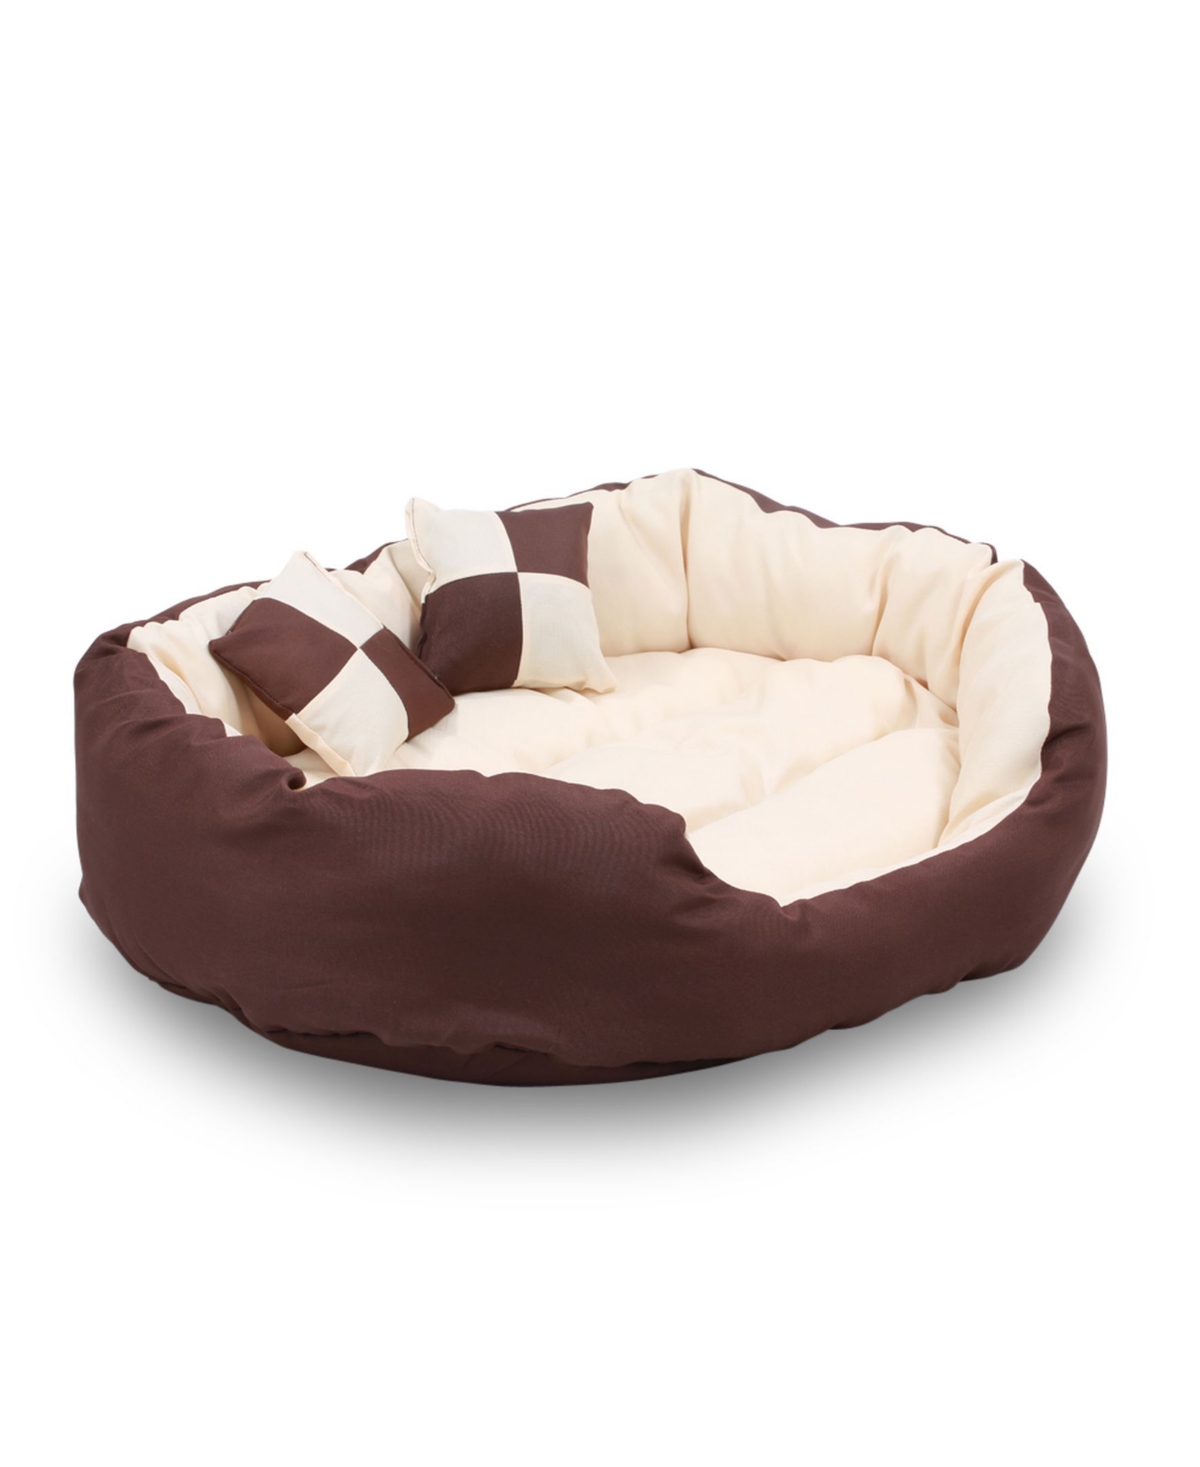 Happycare Textiles Durable Bolster Sleeper Oval Pet Bed with Removable Reversible Insert Cushion and Additional Two Pillow, 43"x32" - Brown